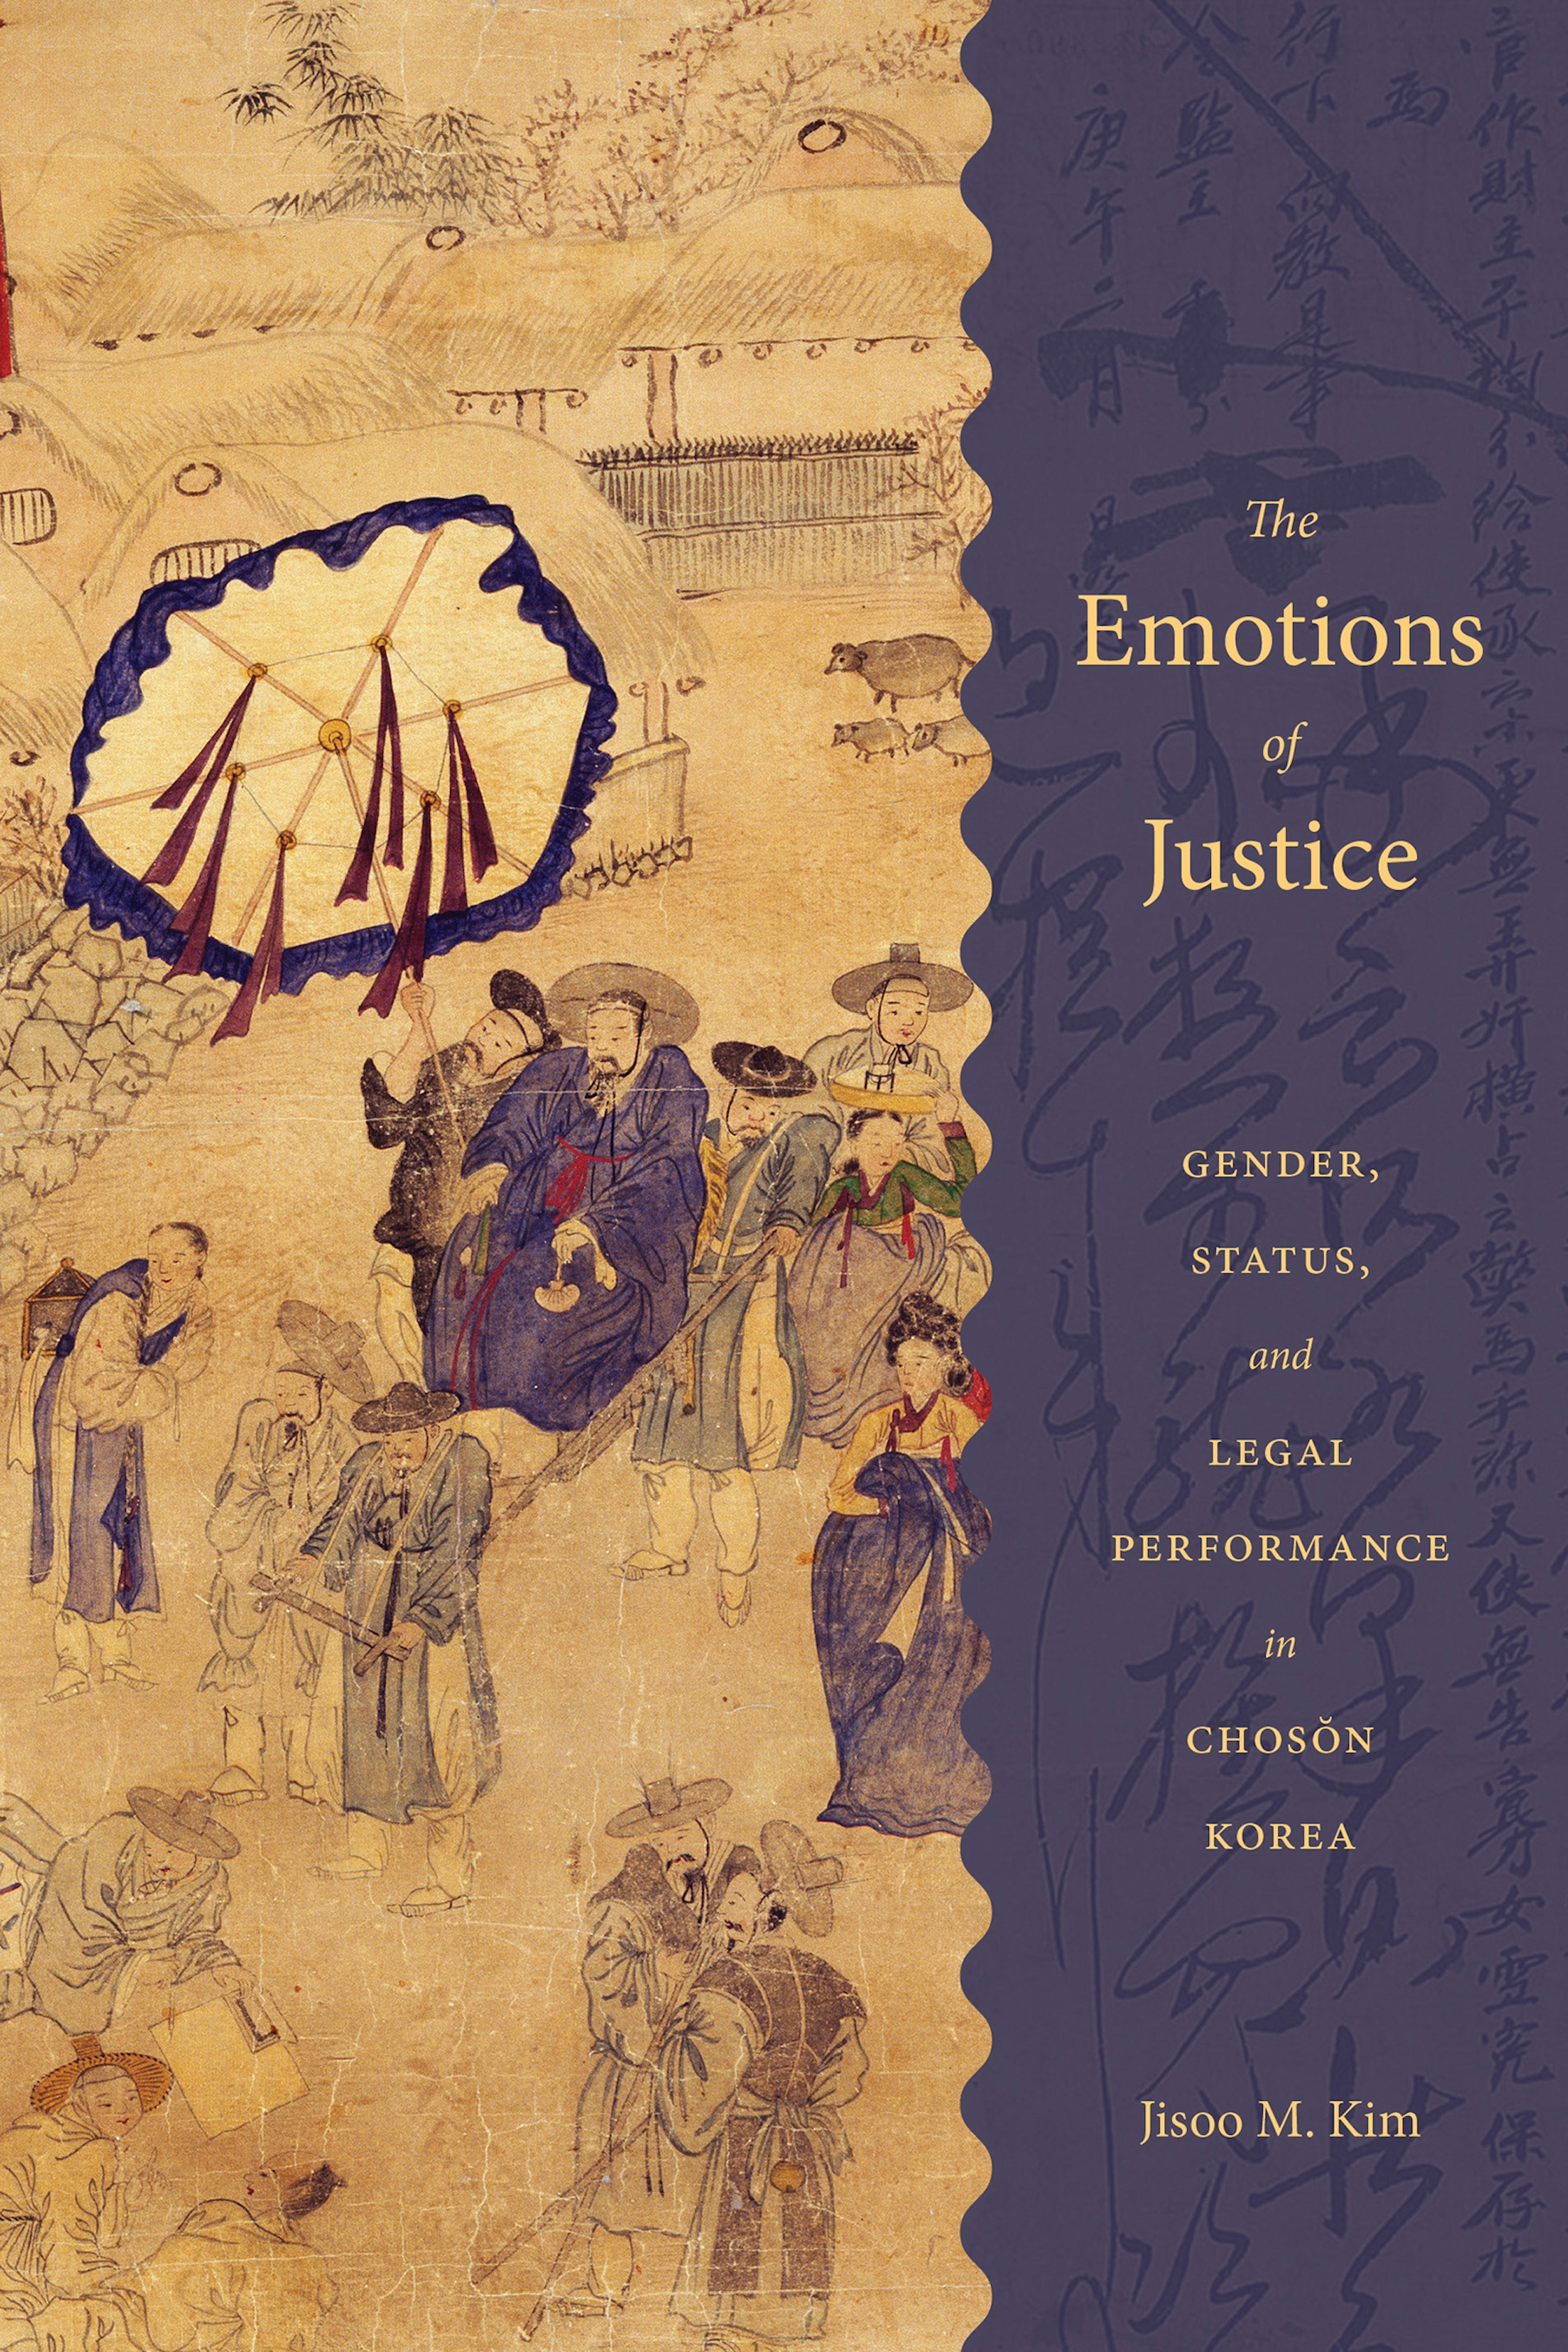 The Emotions of Justice